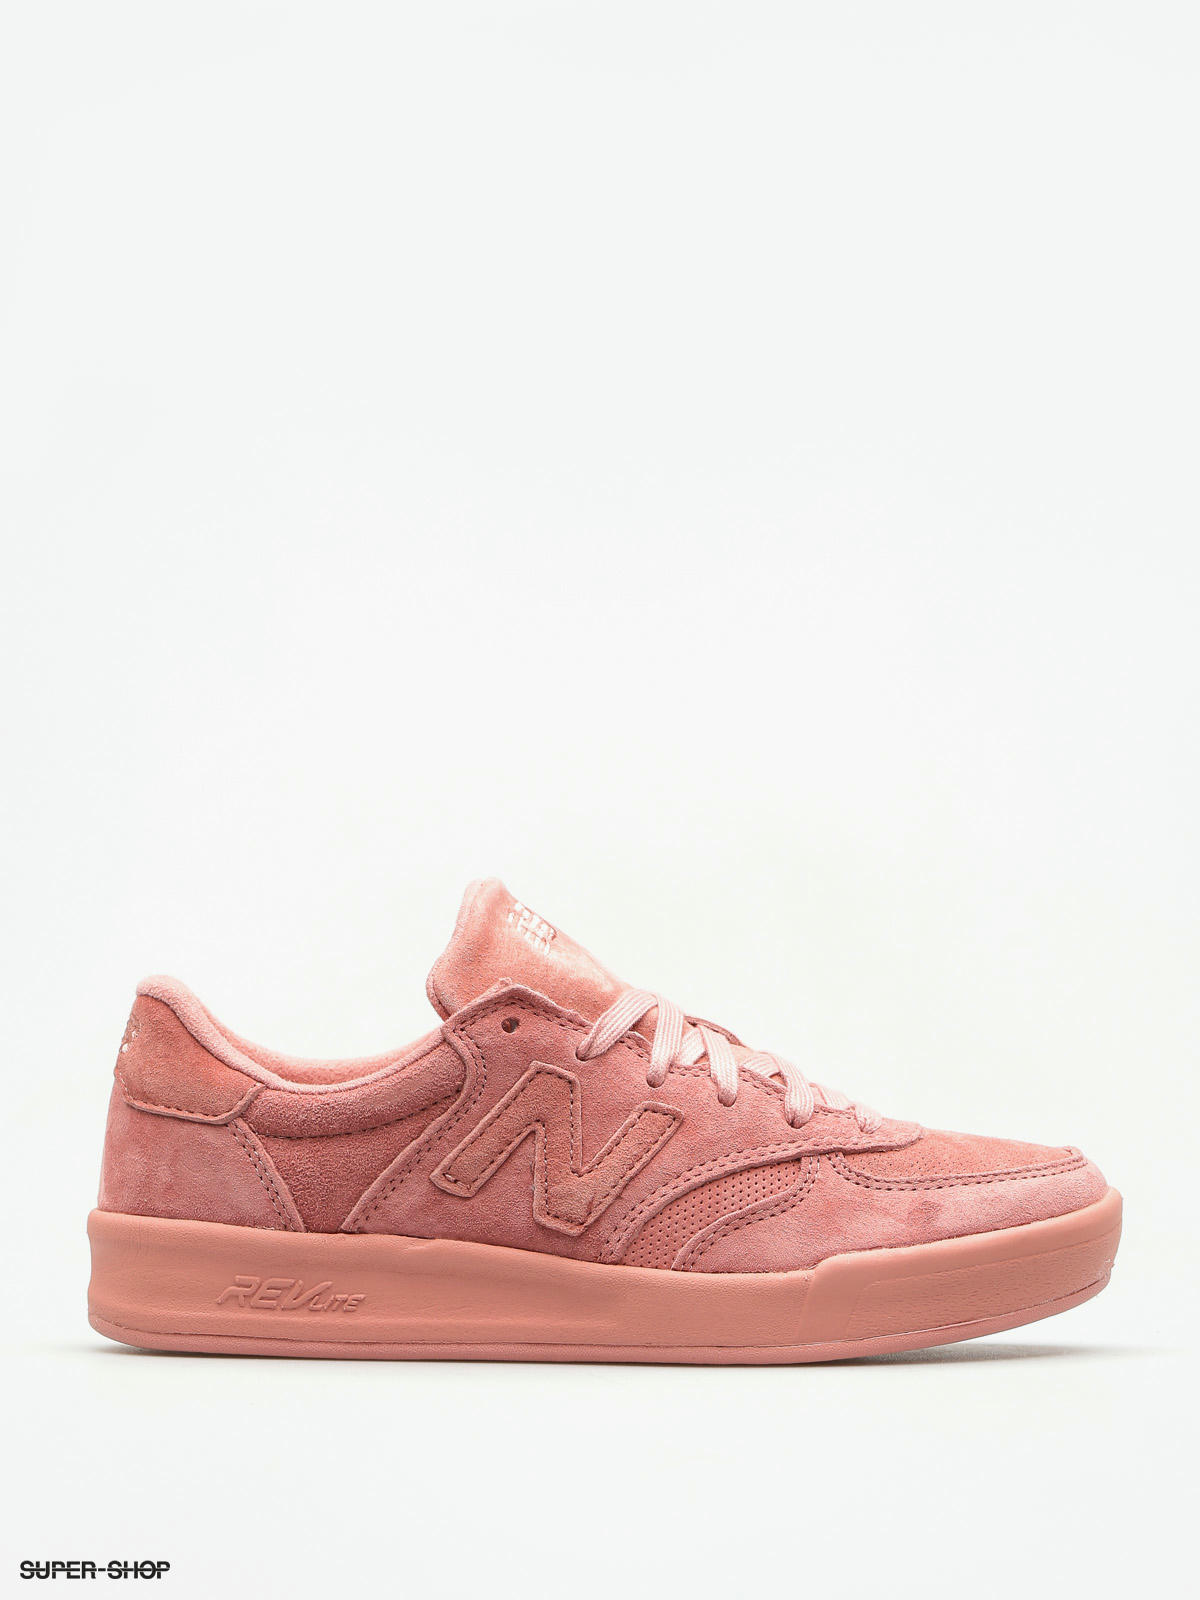 toeter Intens patroon New Balance Shoes 300 Wmn (dusted/peach)